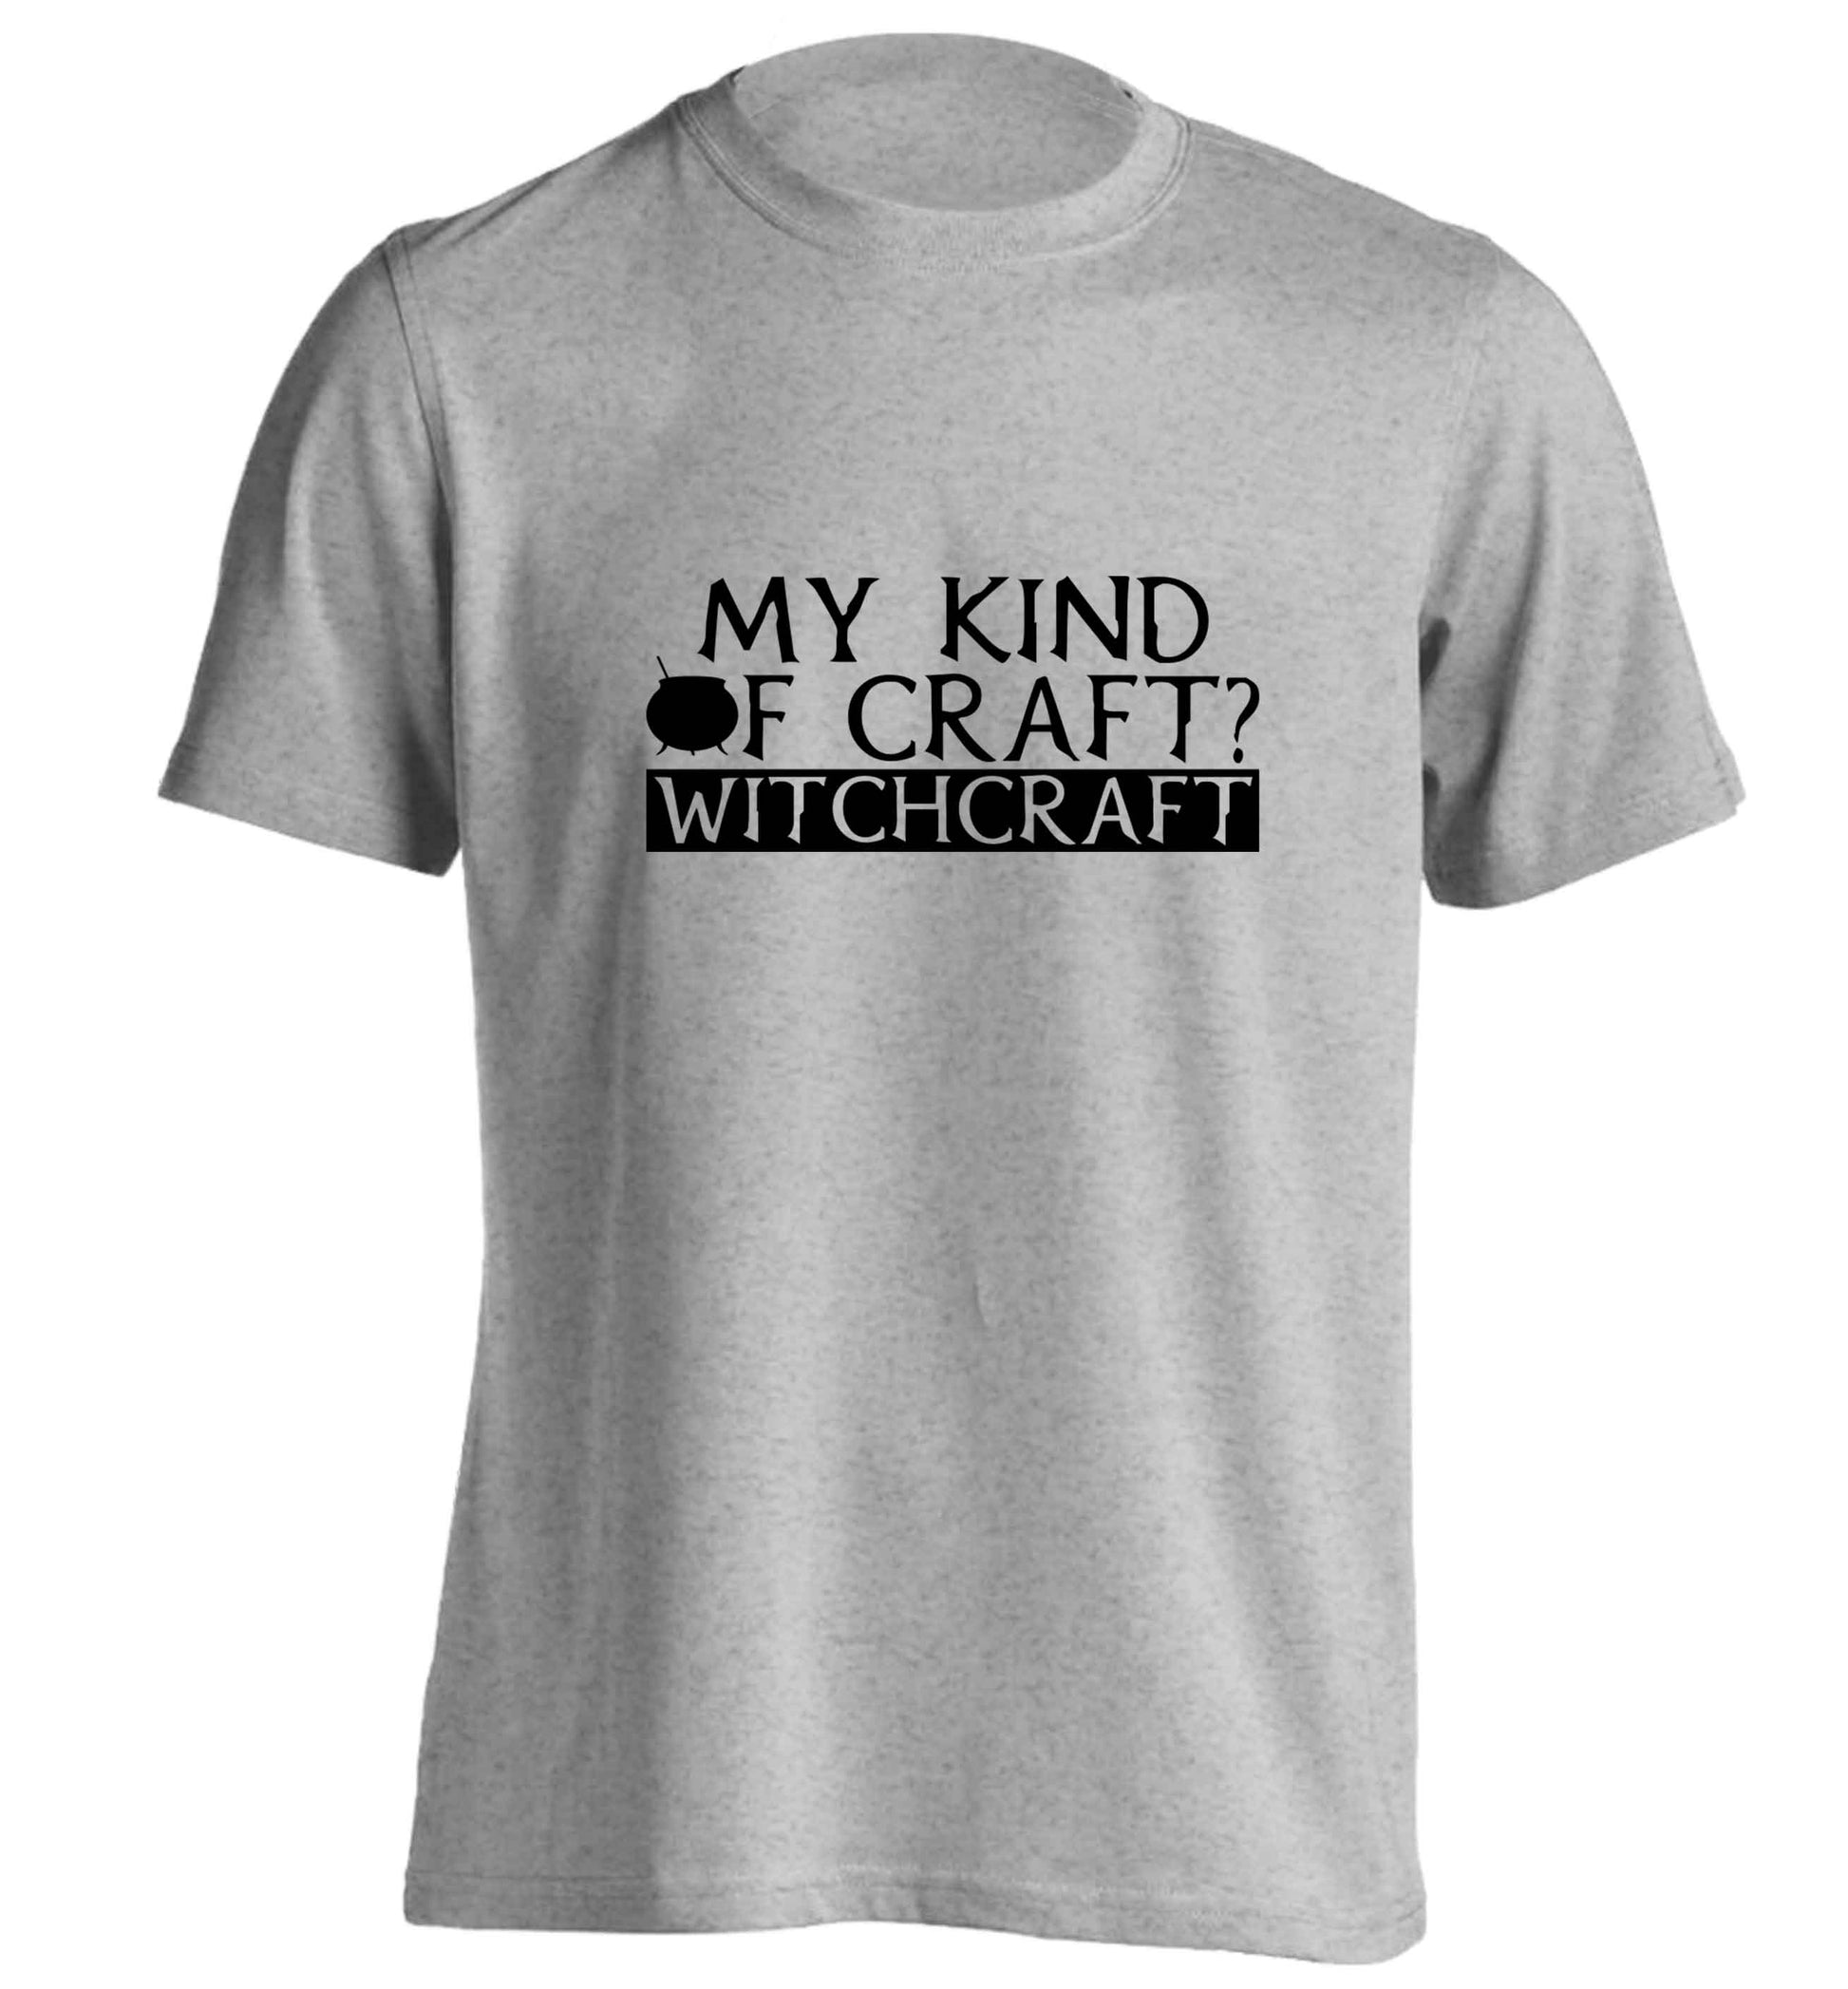 My king of craft? witchcraft  adults unisex grey Tshirt 2XL